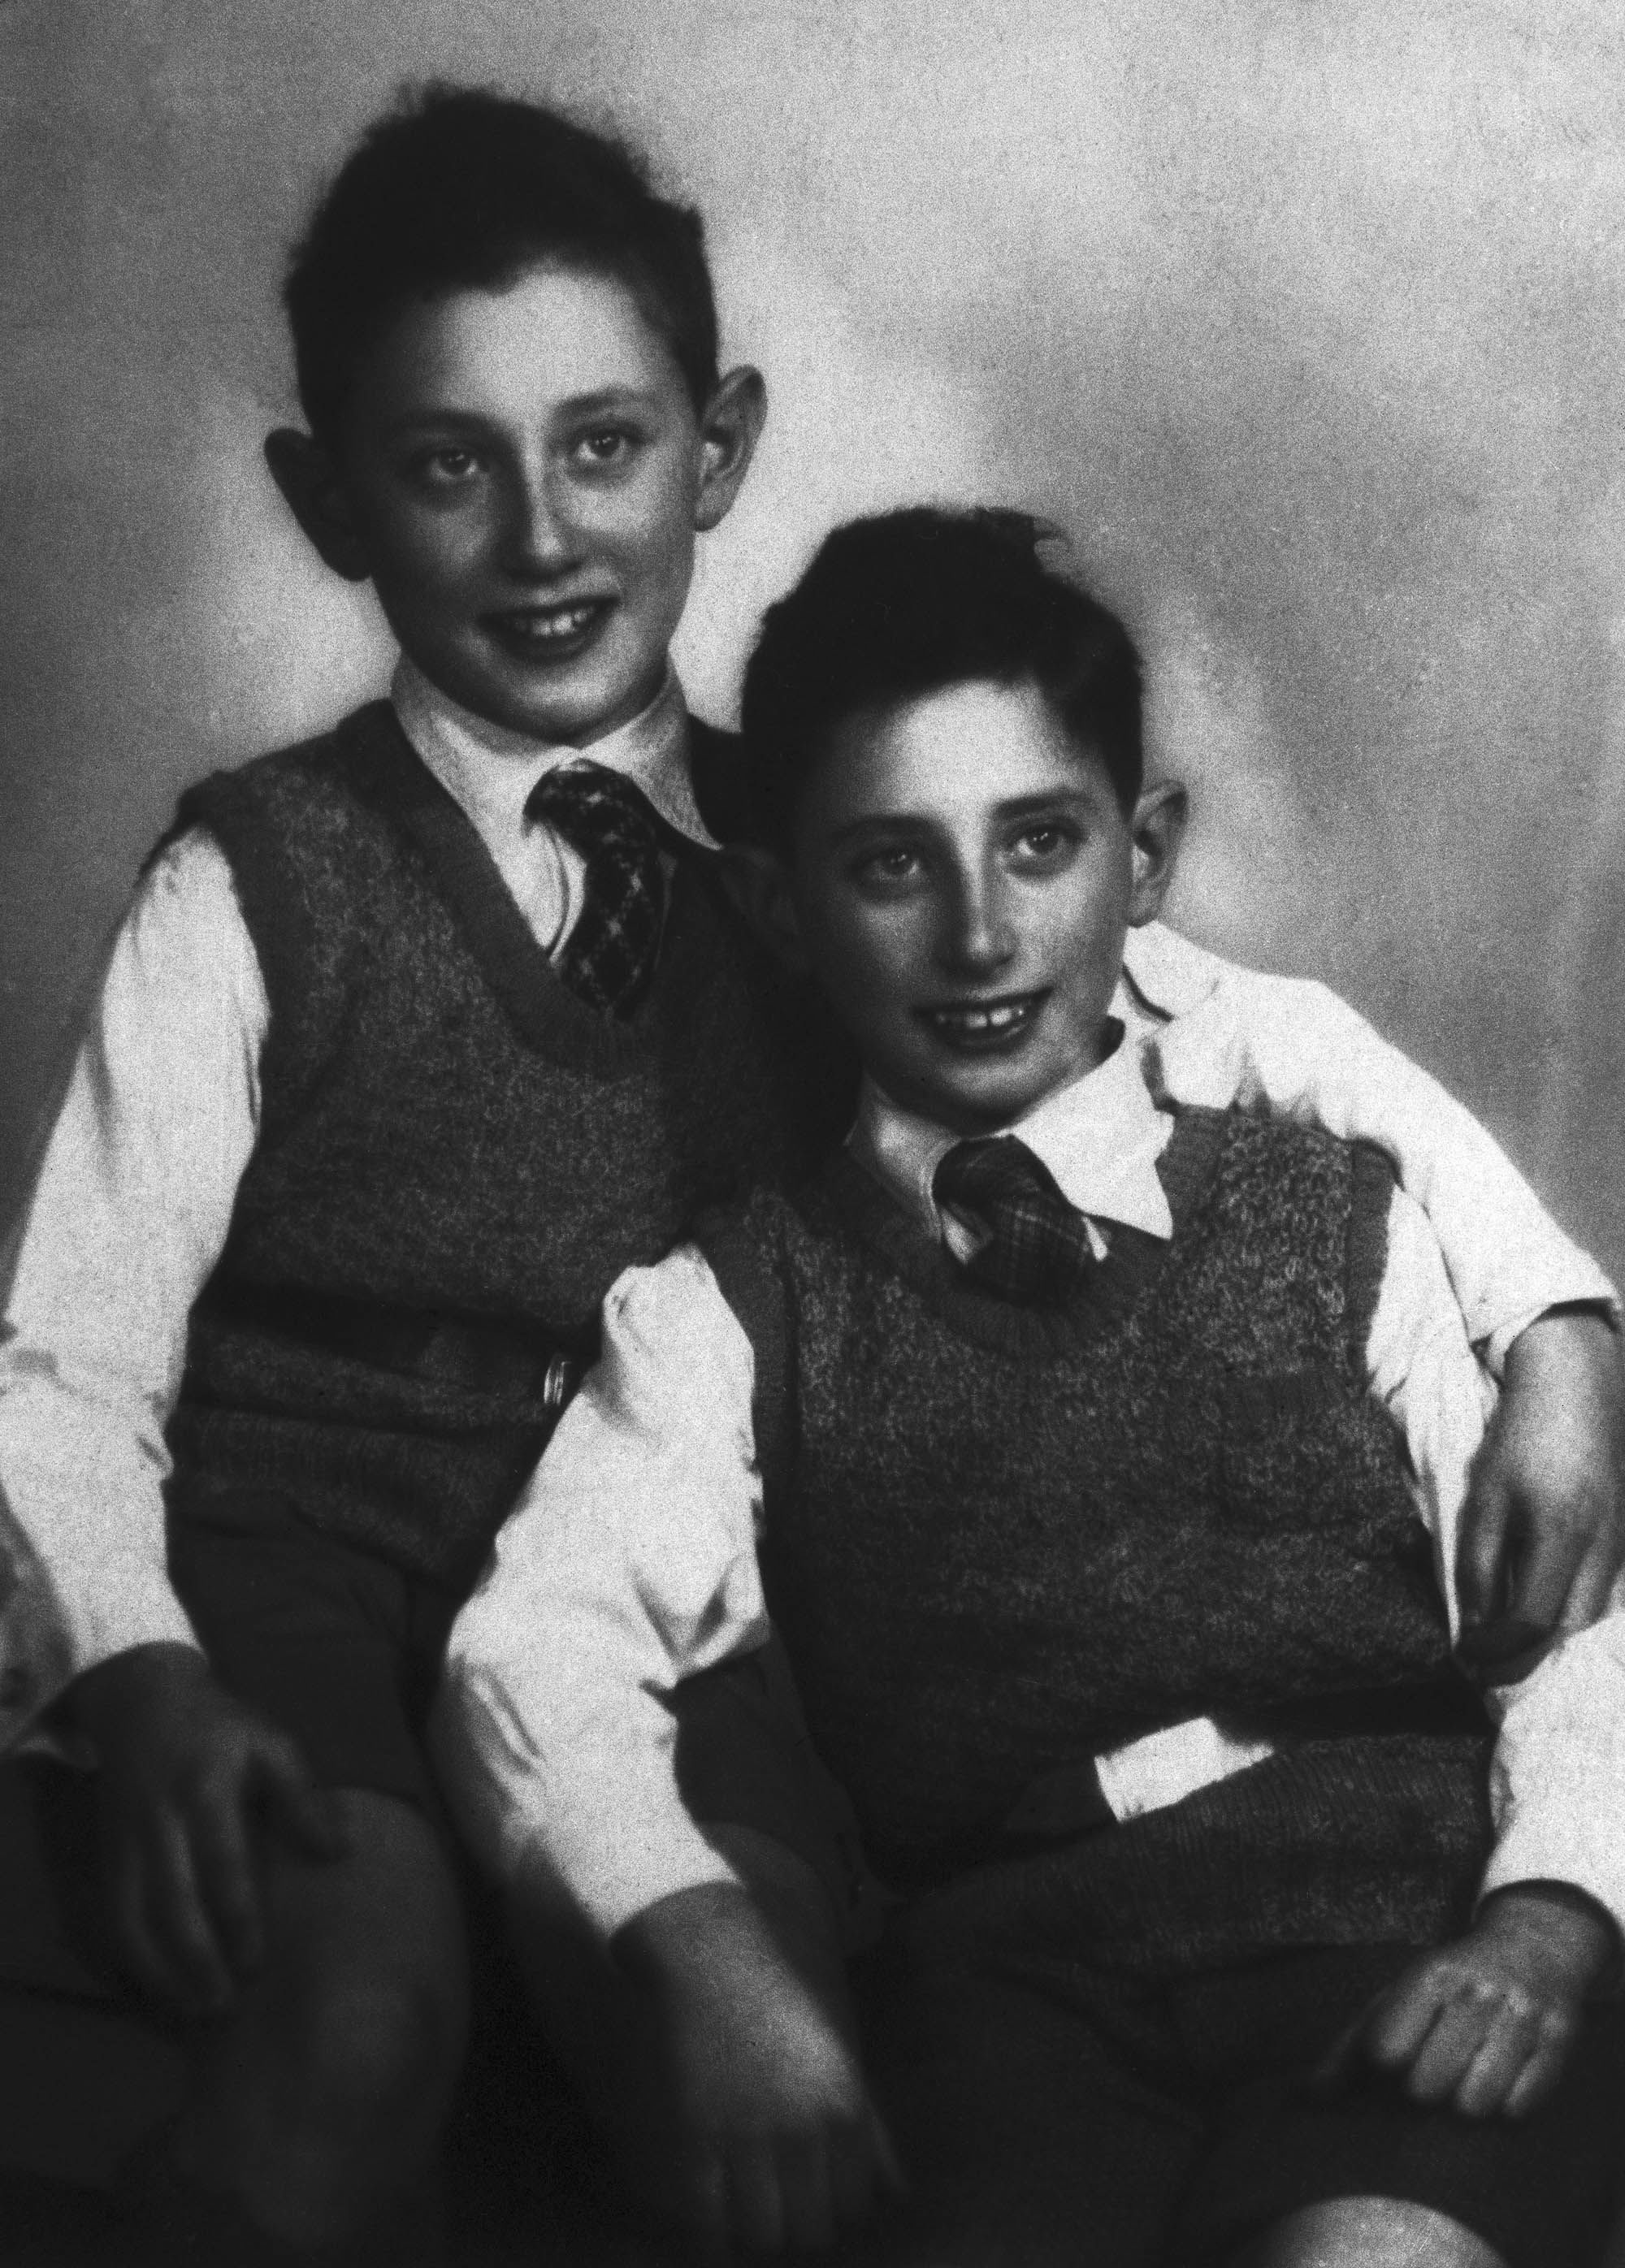 An 11-year-old Kissinger is seen with his younger brother, Walter, in the 1930s. Kissinger was born in Fürth, Germany, as Heinz Alfred Kissinger. His name was changed to Henry when his family fled Nazi Germany and settled in the United States.